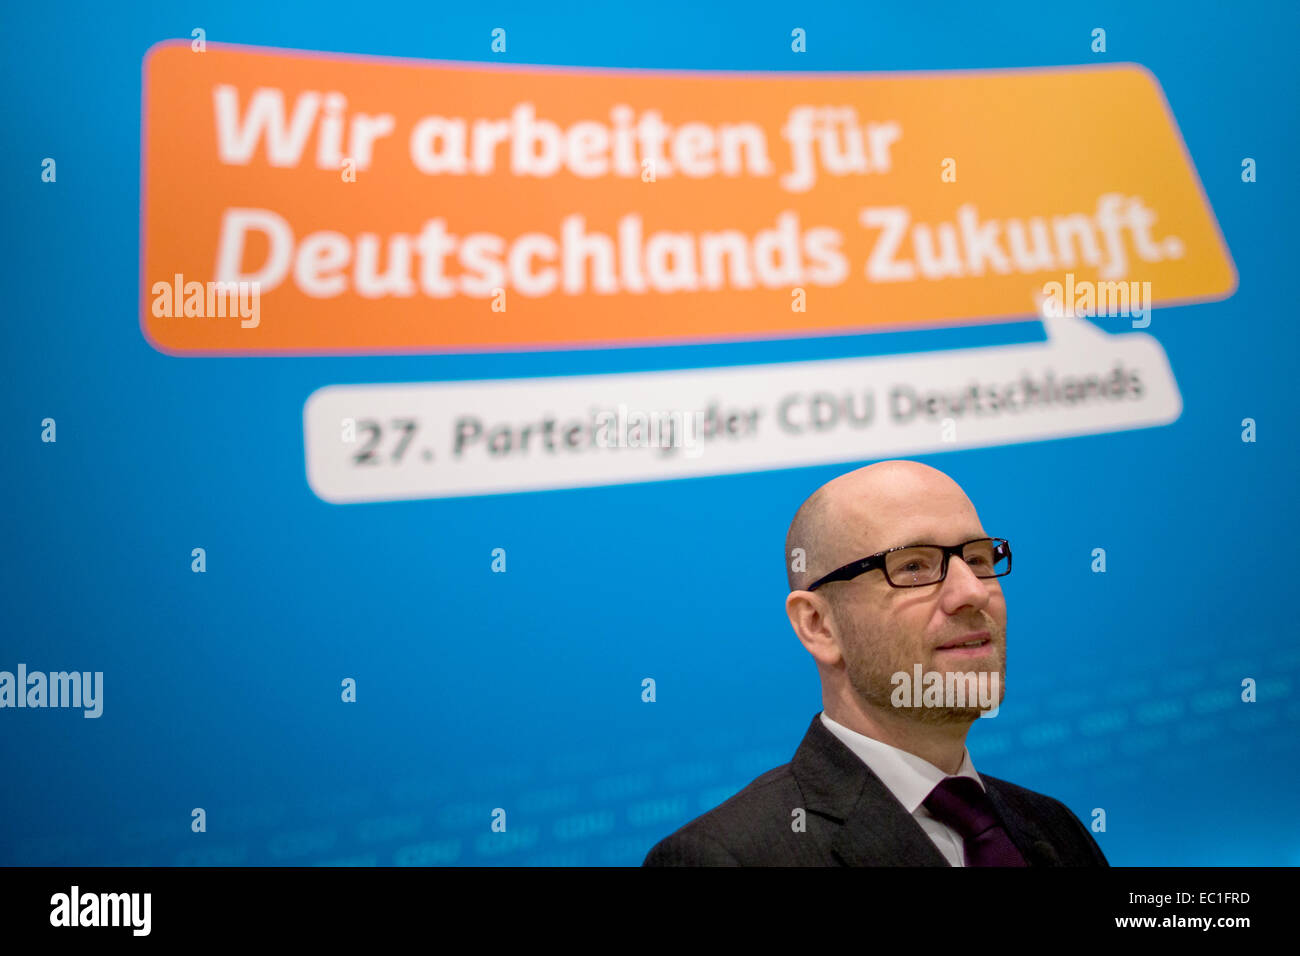 Cologne, Germany. 08th Dec, 2014. Secretary General of the Christian Democratic Union (CDU) Peter Tauber stands in front of the party motto 'We work for Germany's future' before the federal party convention in Cologne, Germany, 08 December 2014. The party convention takes place on Tuesday and Wednesday. Photo: ROLF VENNENBERND/dpa/Alamy Live News Stock Photo